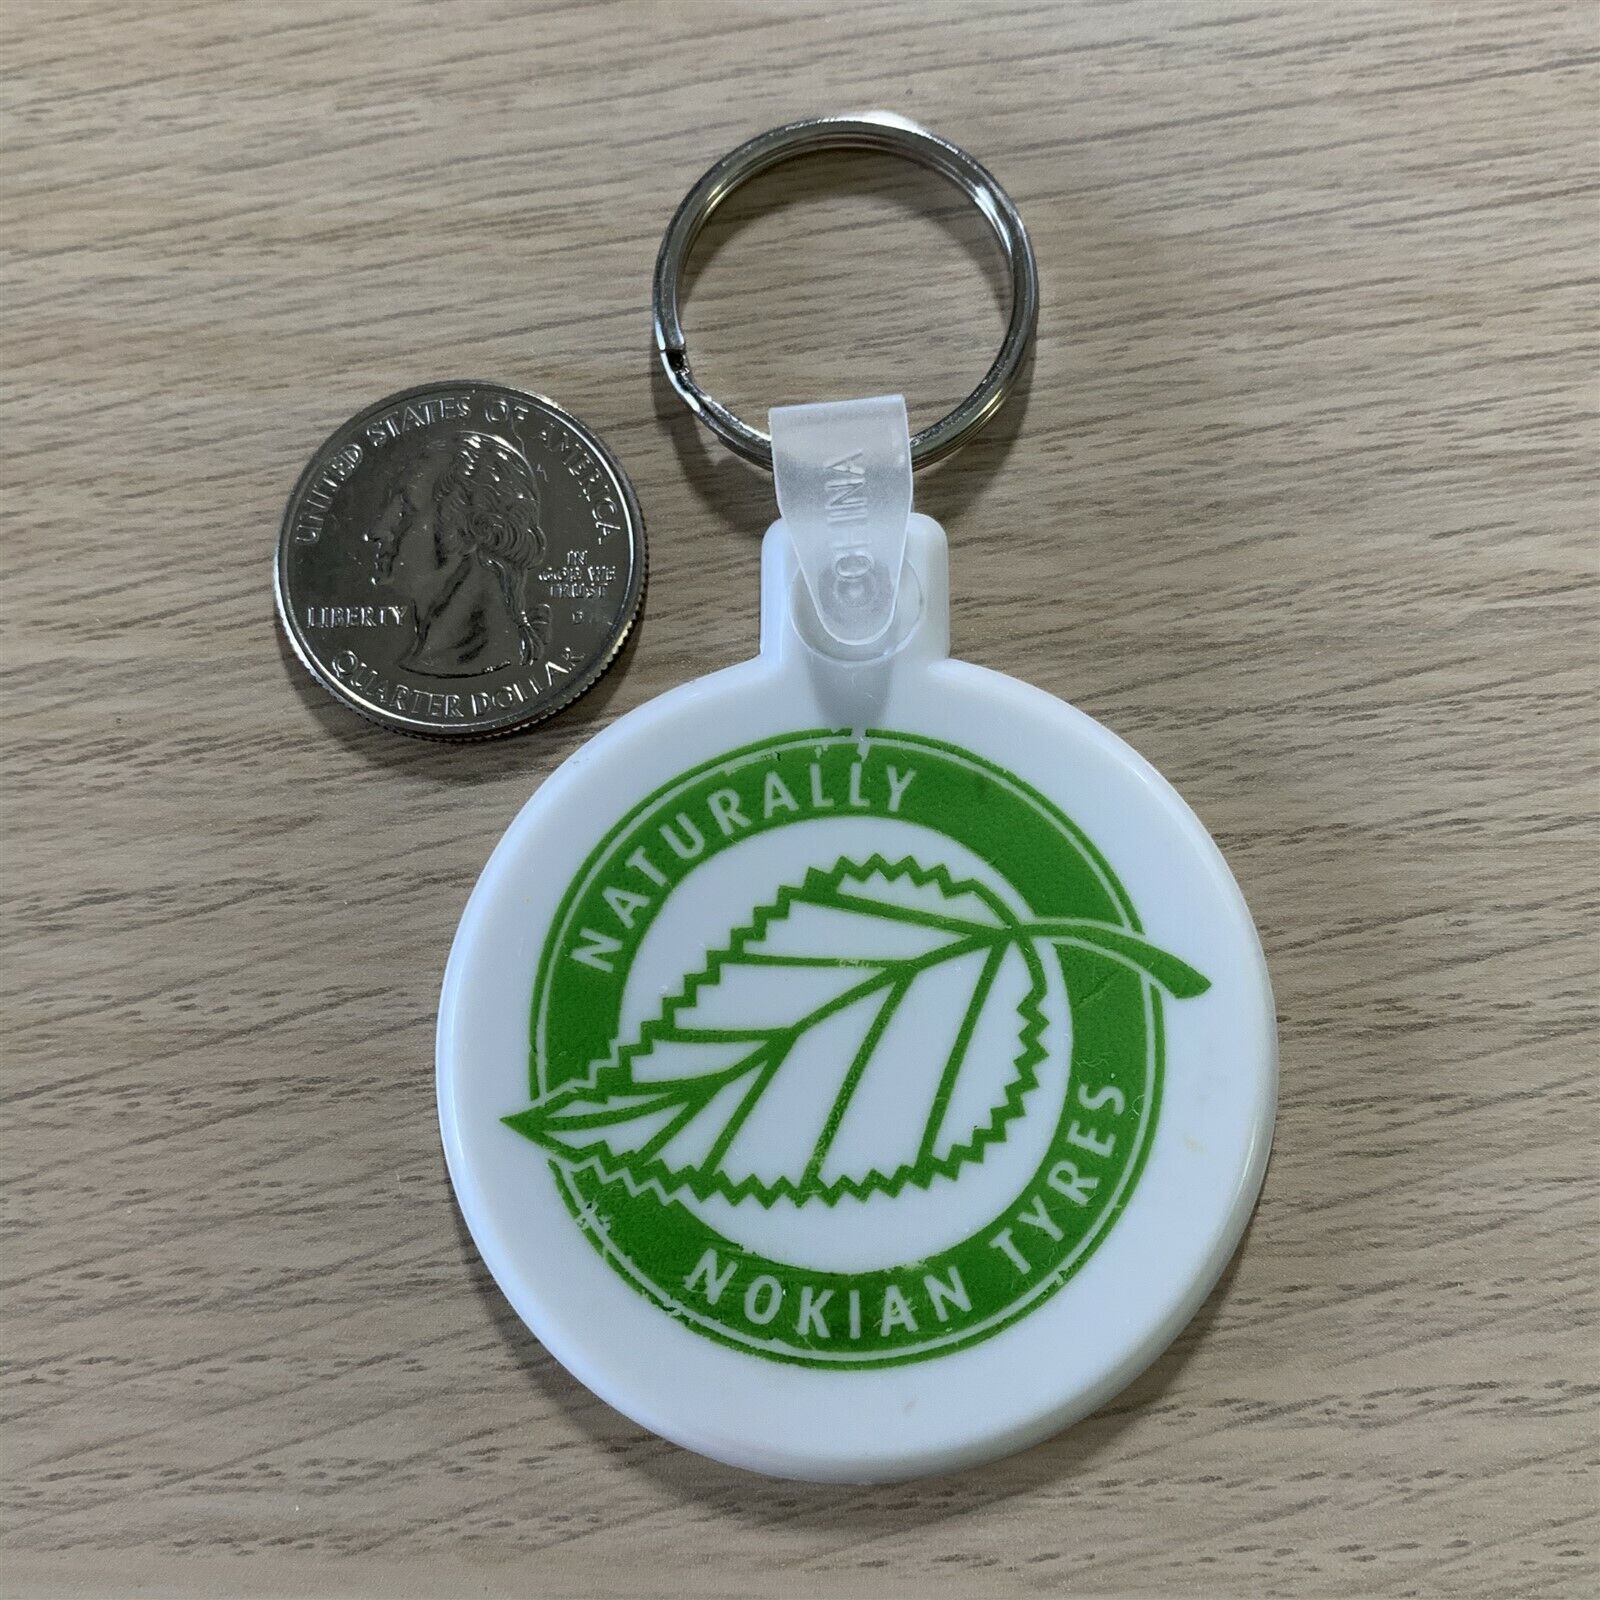 Naturally Nokian Tyres Winter Tires Keychain Key Ring #38685